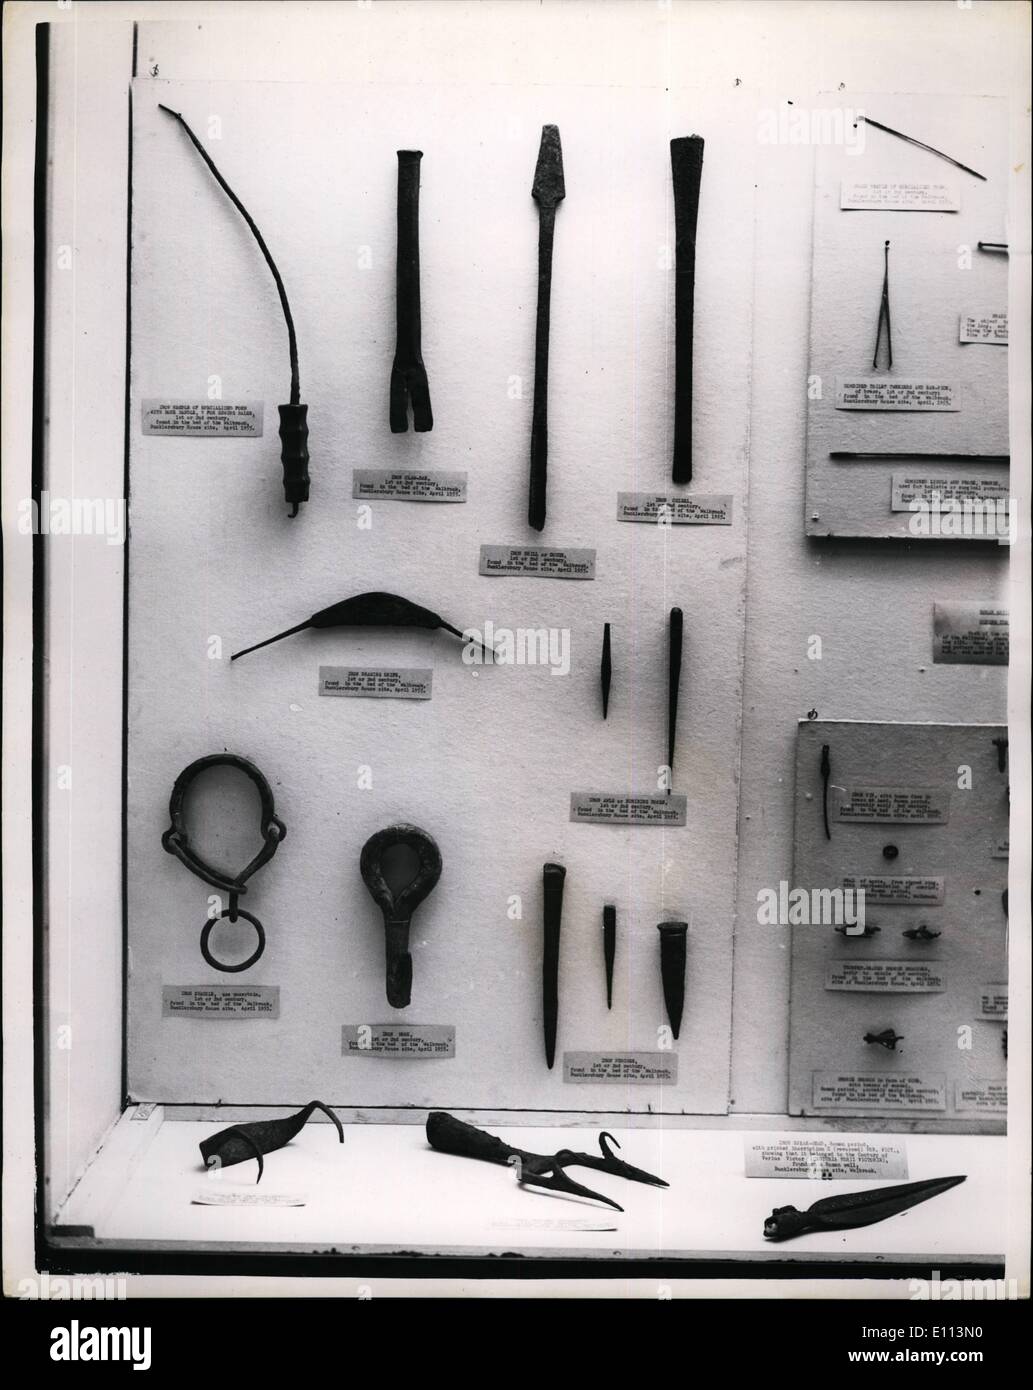 Oct. 10, 1975 - Archaeology Exhibition at Royal Exchange: An exhibition organised by the London and Middlsex Archaeological Society, to mark their centenary, was opened at the Royal Exchange today by the Lord Mayor of London Sir Seymour Howard Photo shows Iron tools dated 1st. and 2nd. Century, found in Walbrook, in the City. Stock Photo